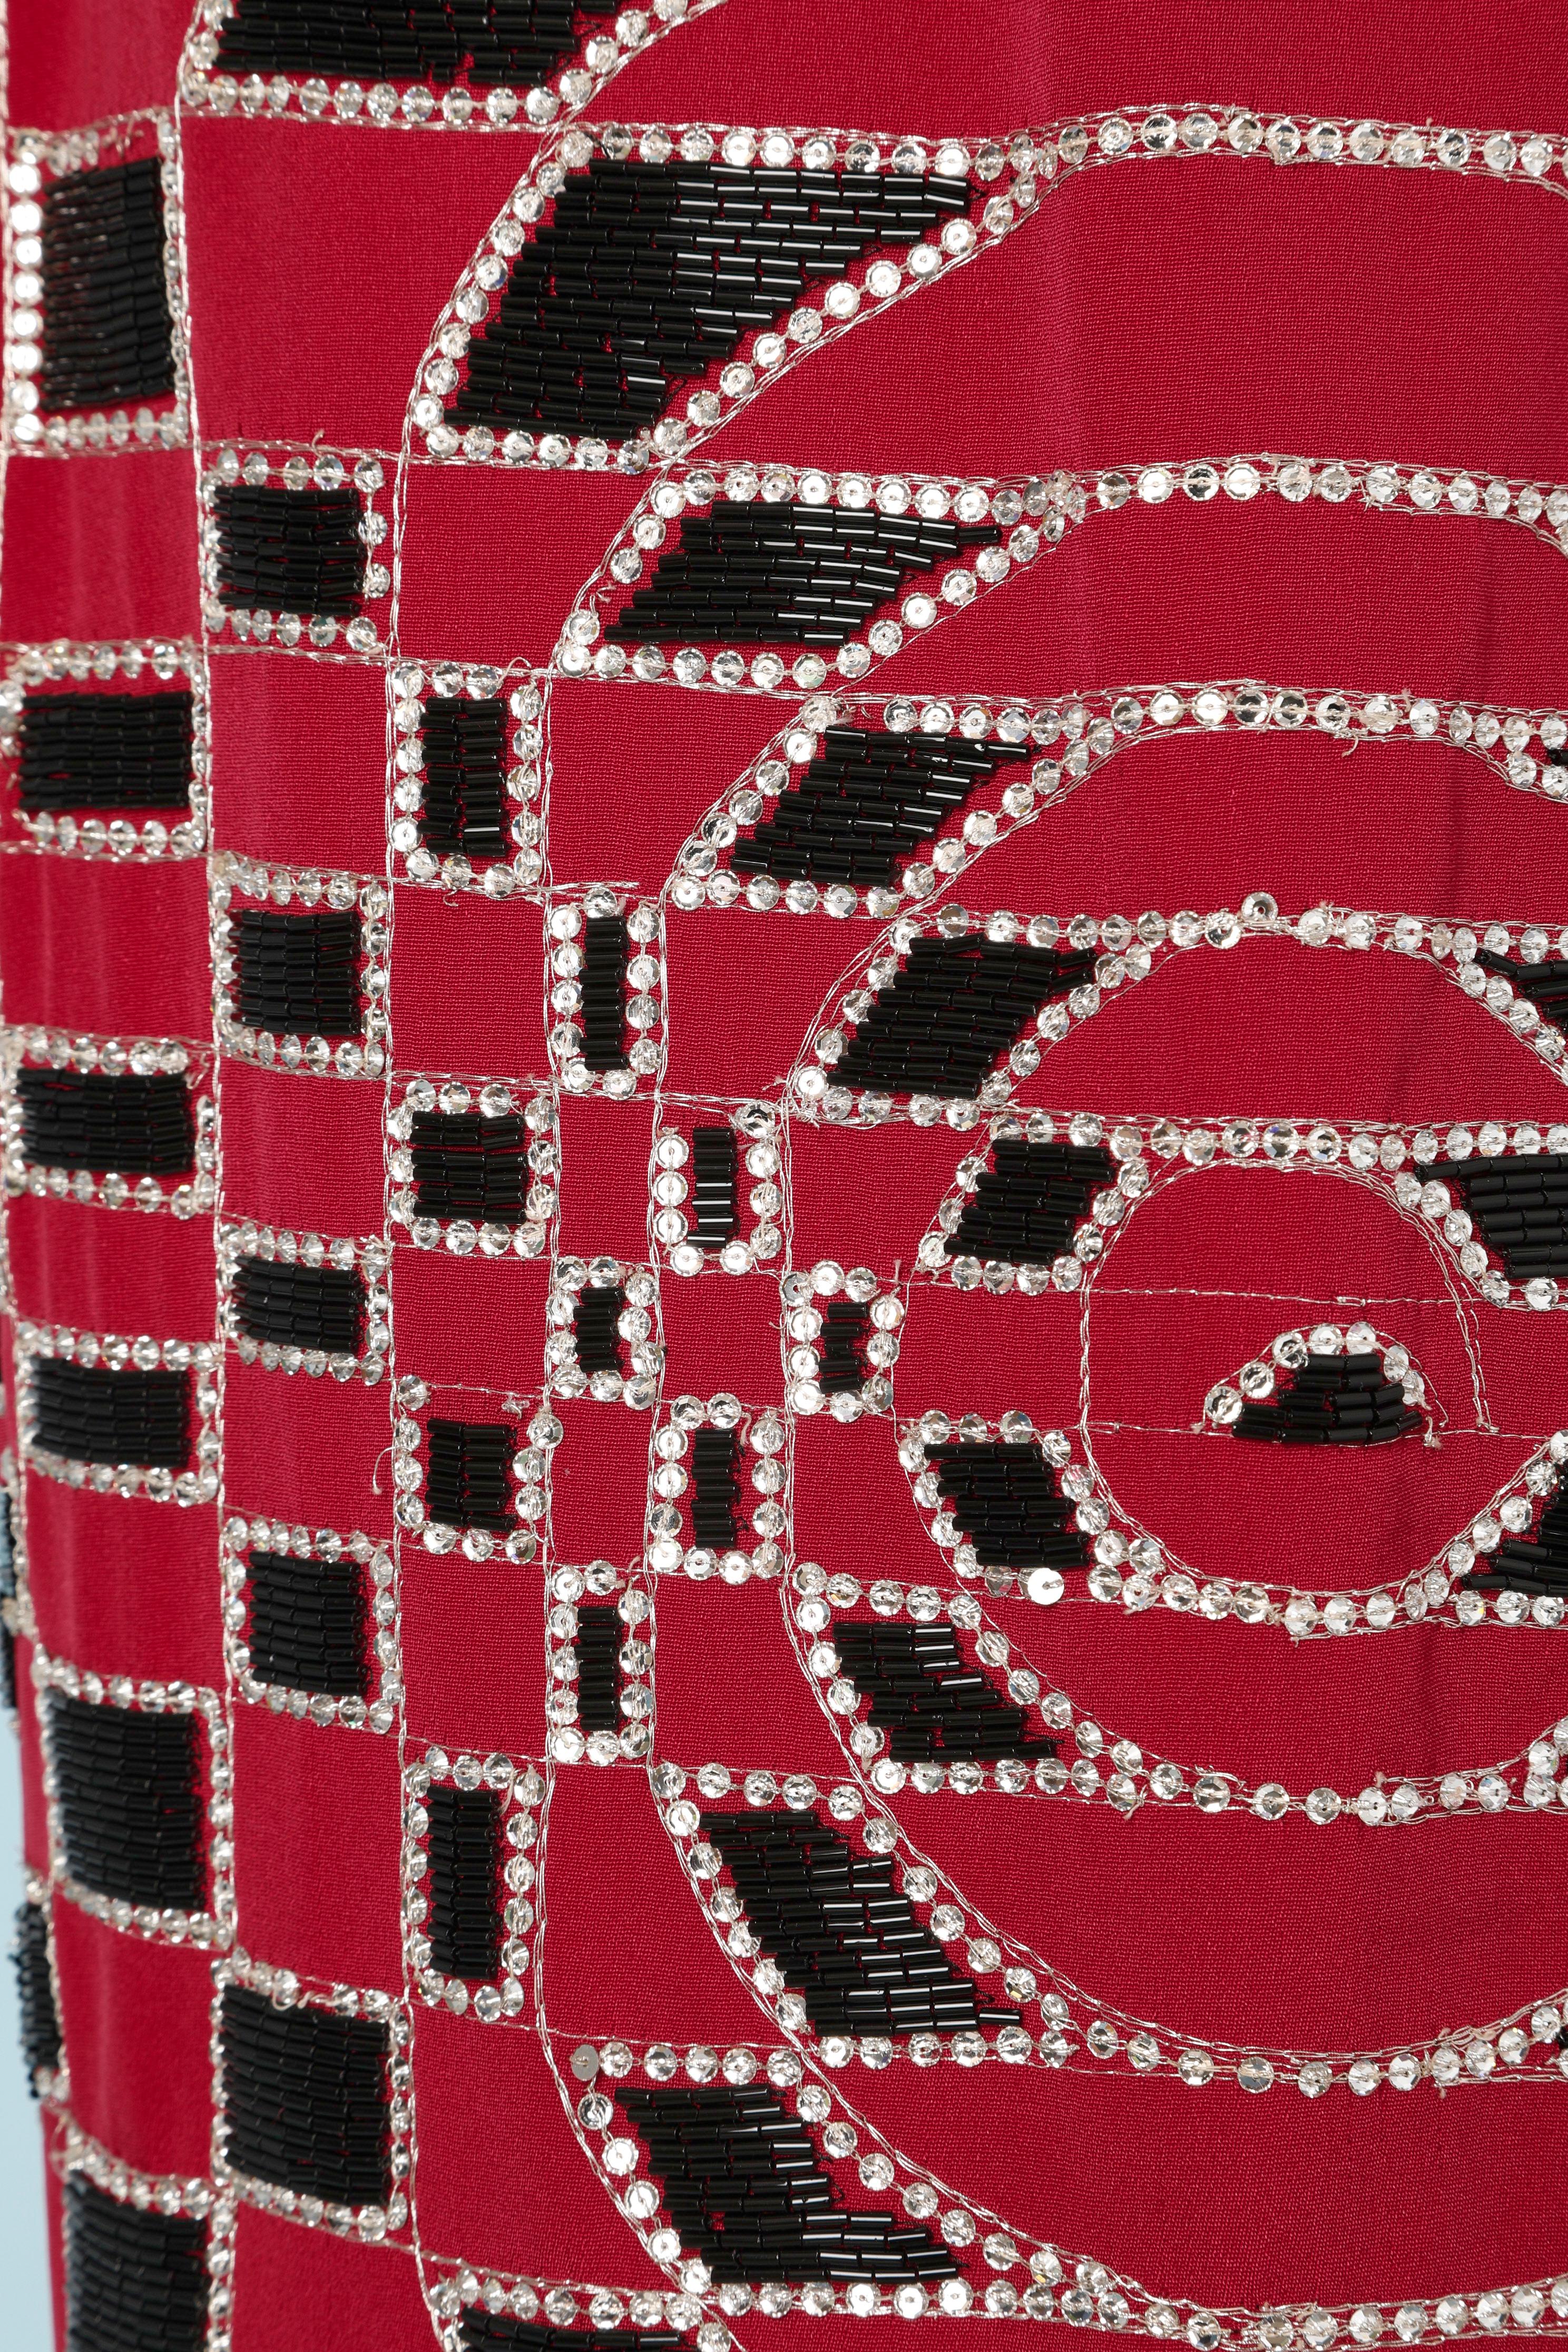 Pencil skirt covered black glass beads and silver sequences on red silk base 